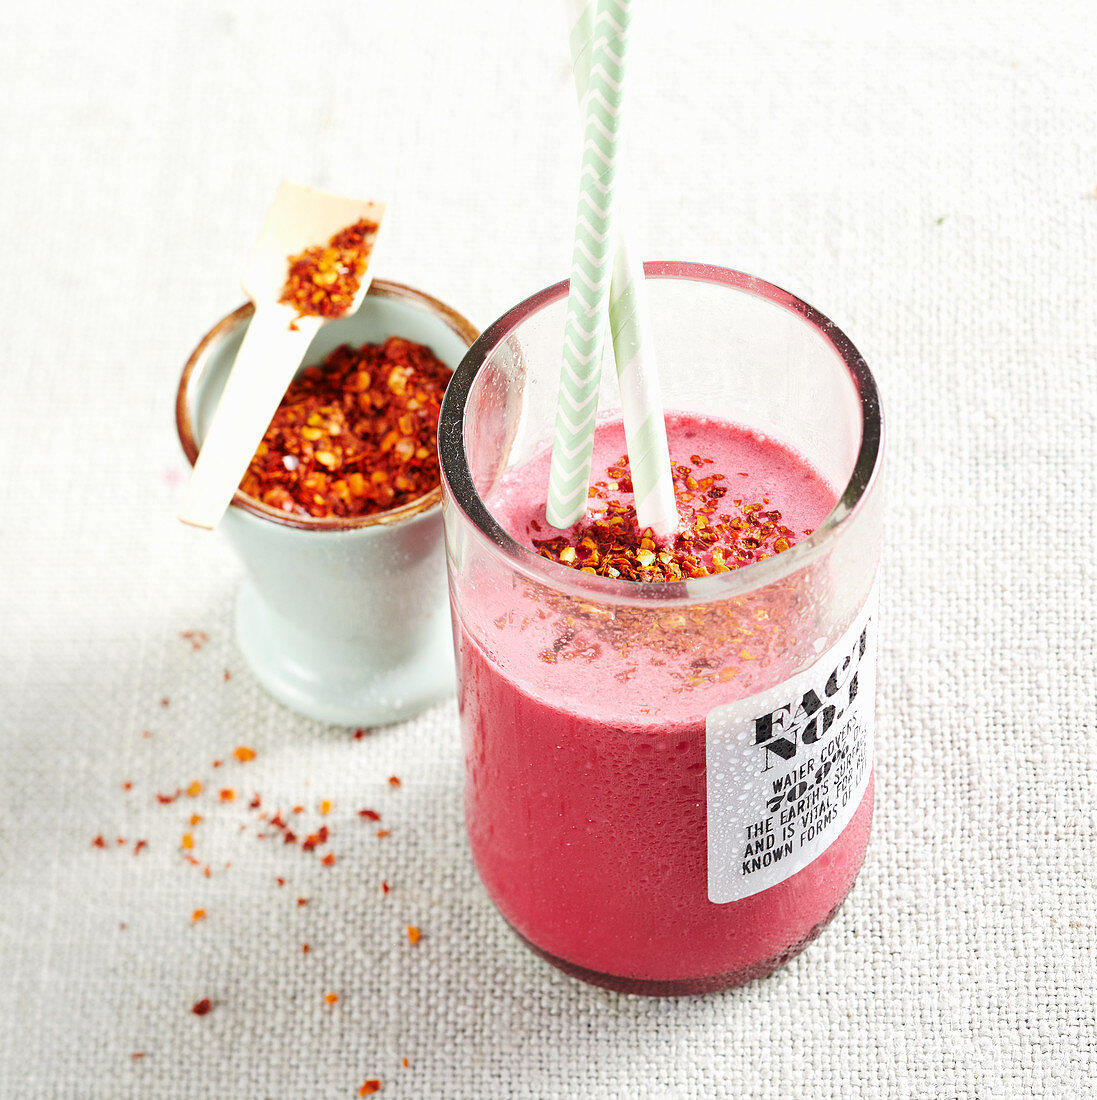 Spicy beetroot smoothie with chilli flakes, creamy horseradish and buttermilk